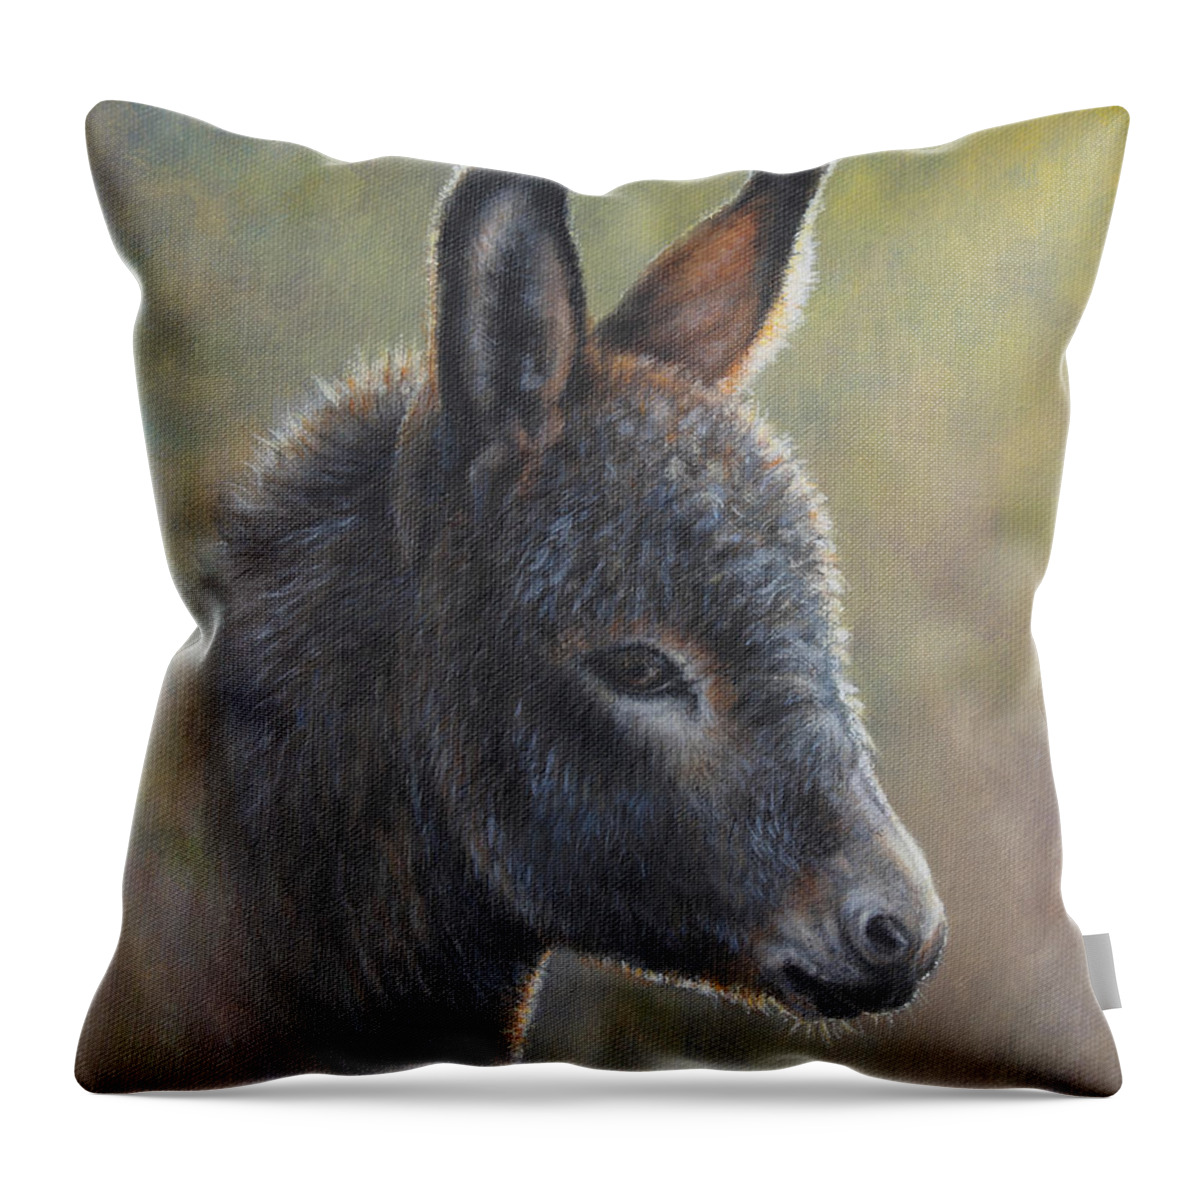 Donkey Throw Pillow featuring the painting Poncho by Kim Lockman